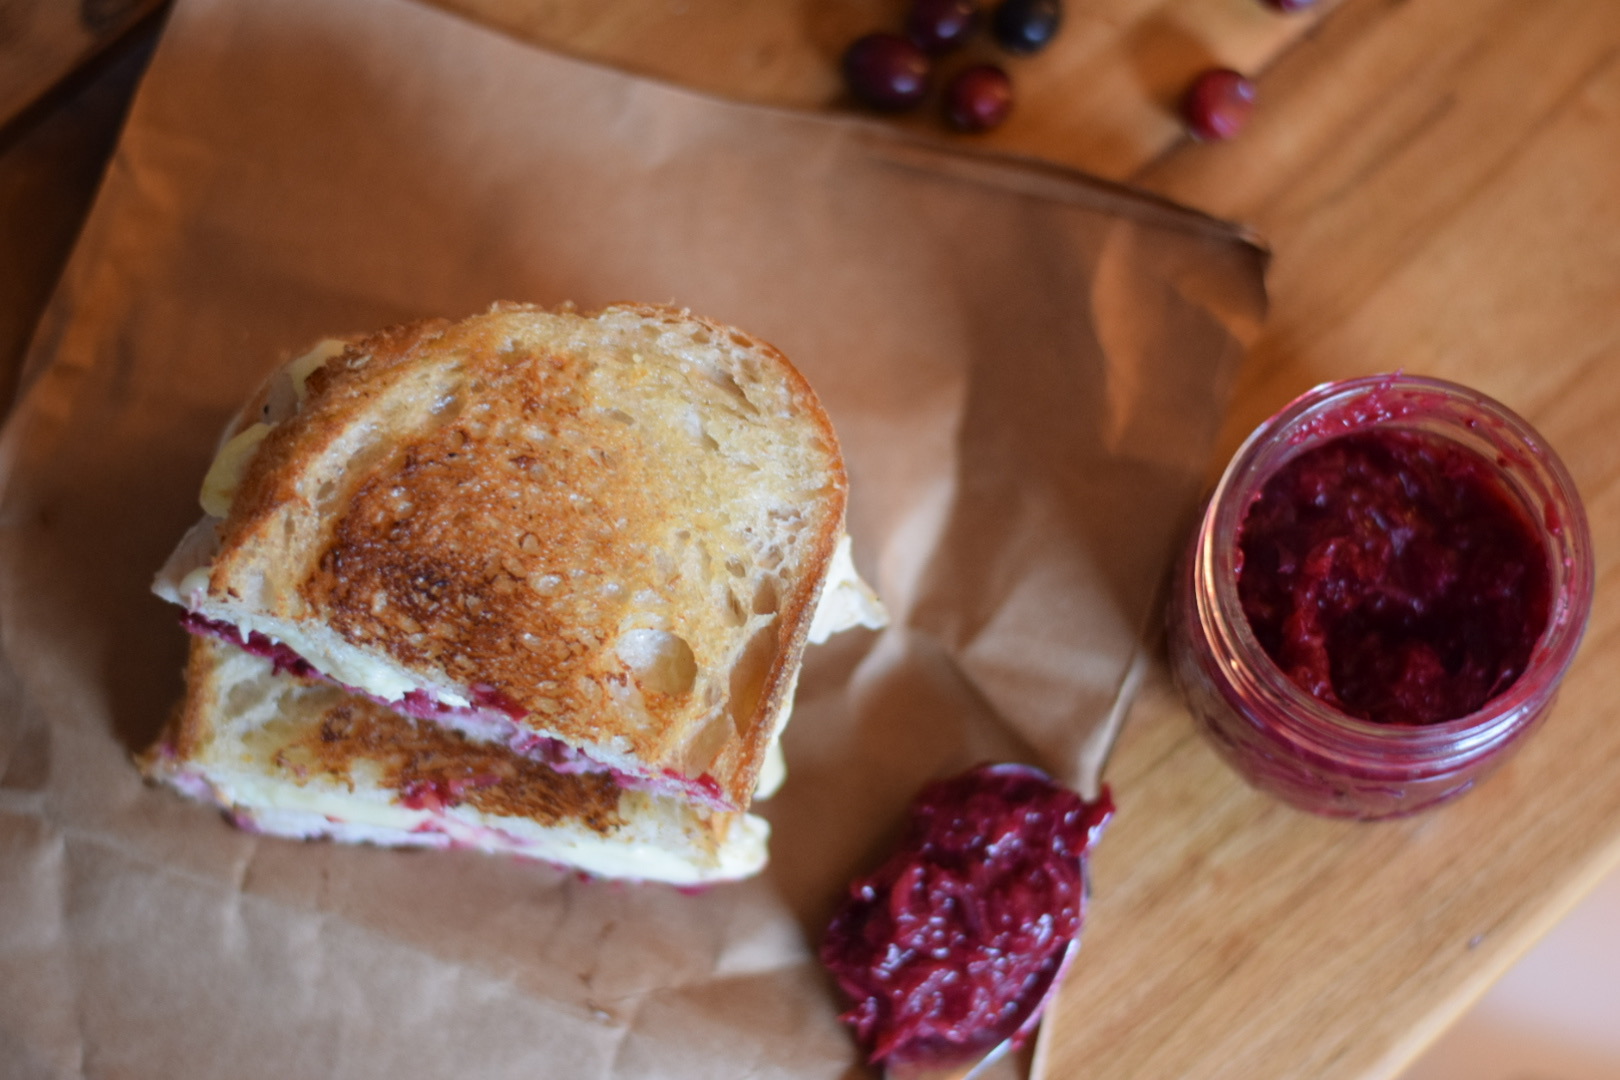 cranberry and brie sandwich on brown paper